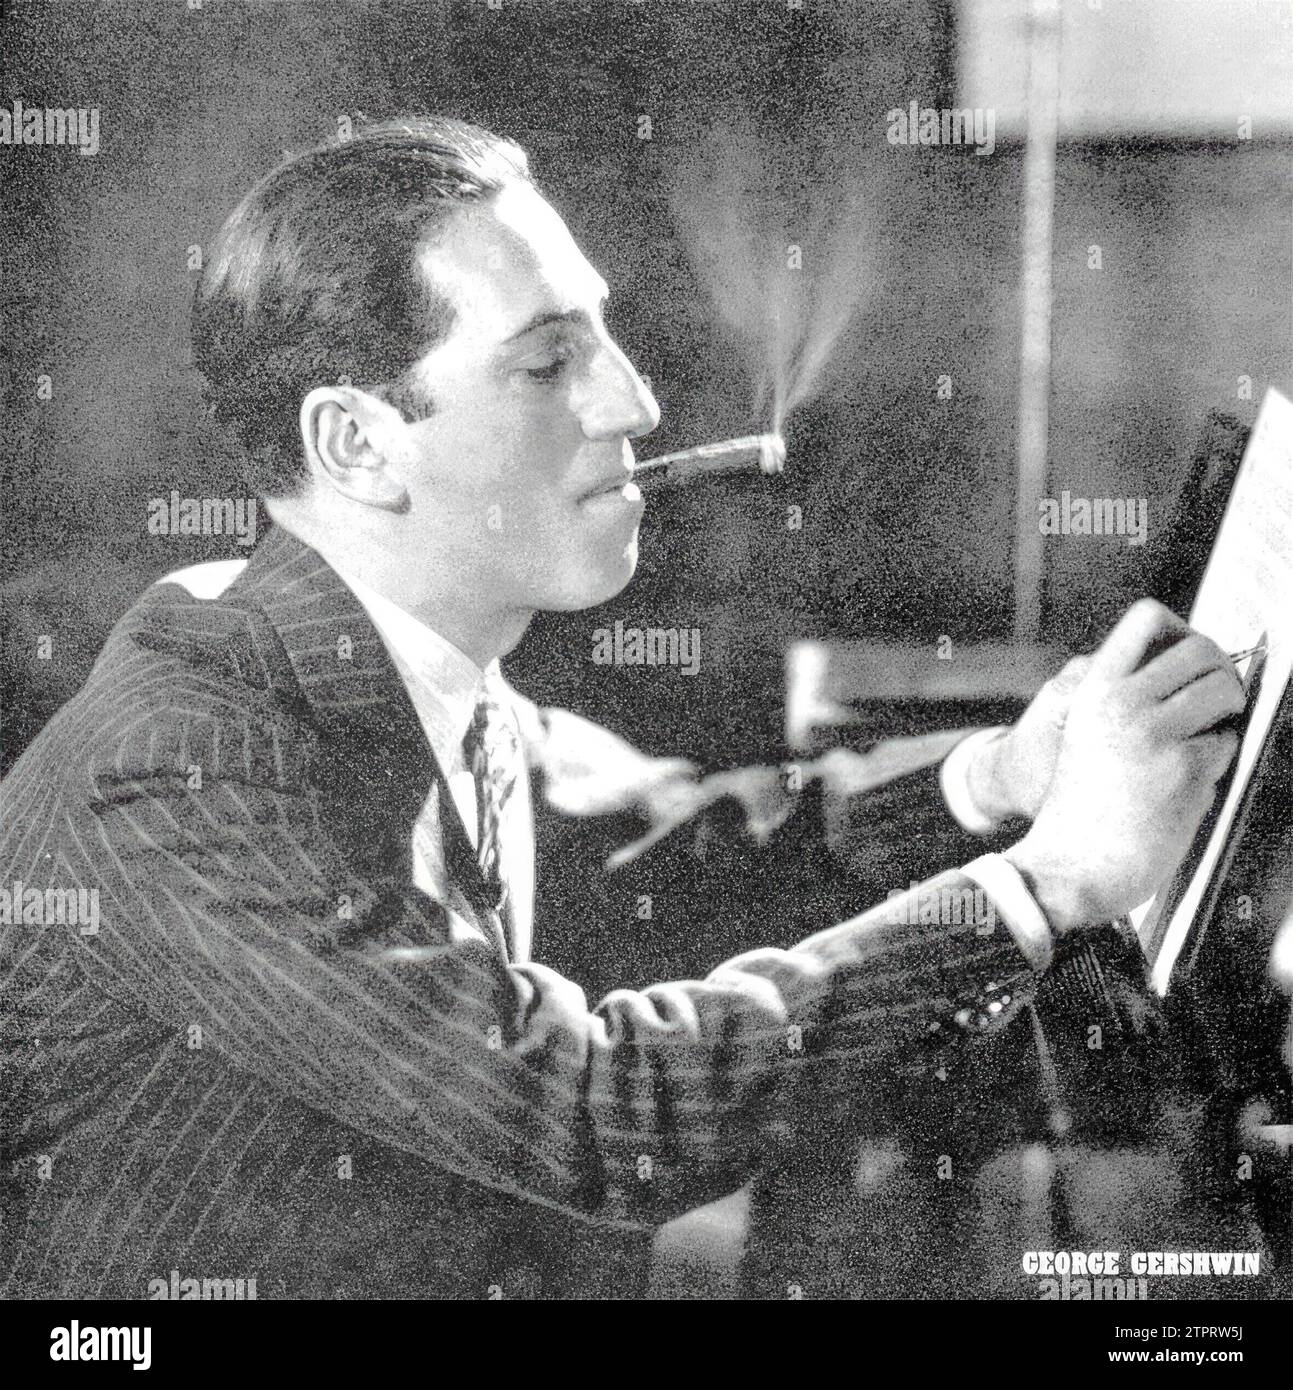 12/31/1926. George Gershwin photographed in the 1920s. Credit: Album / Archivo ABC Stock Photo